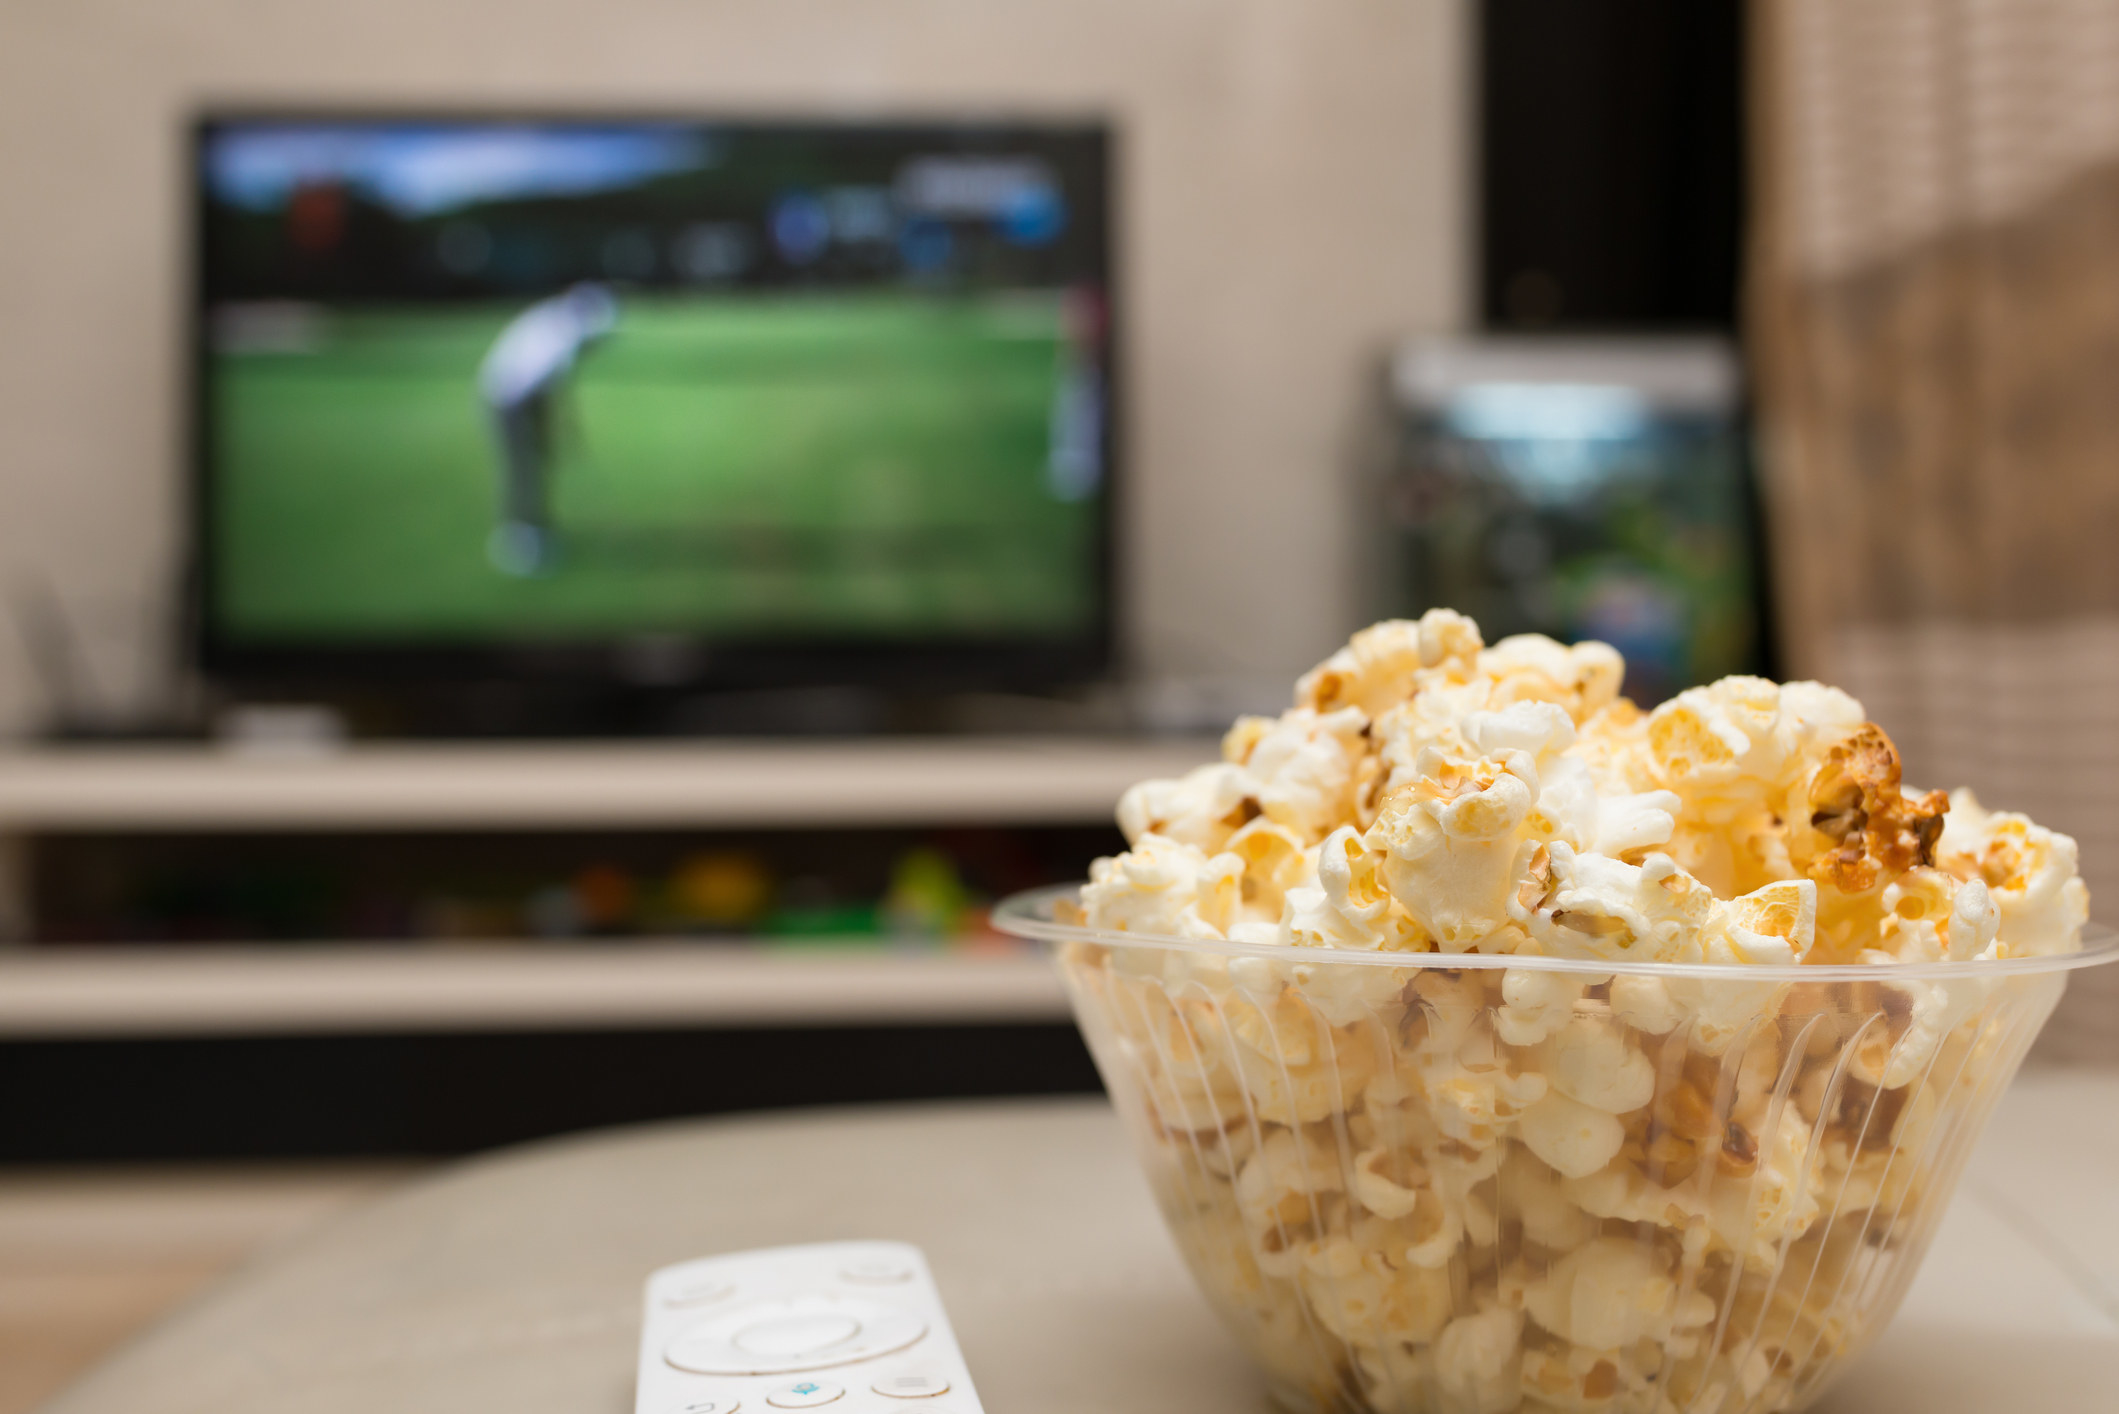 A bowl of popcorn and a TV remote with golf playing in the background